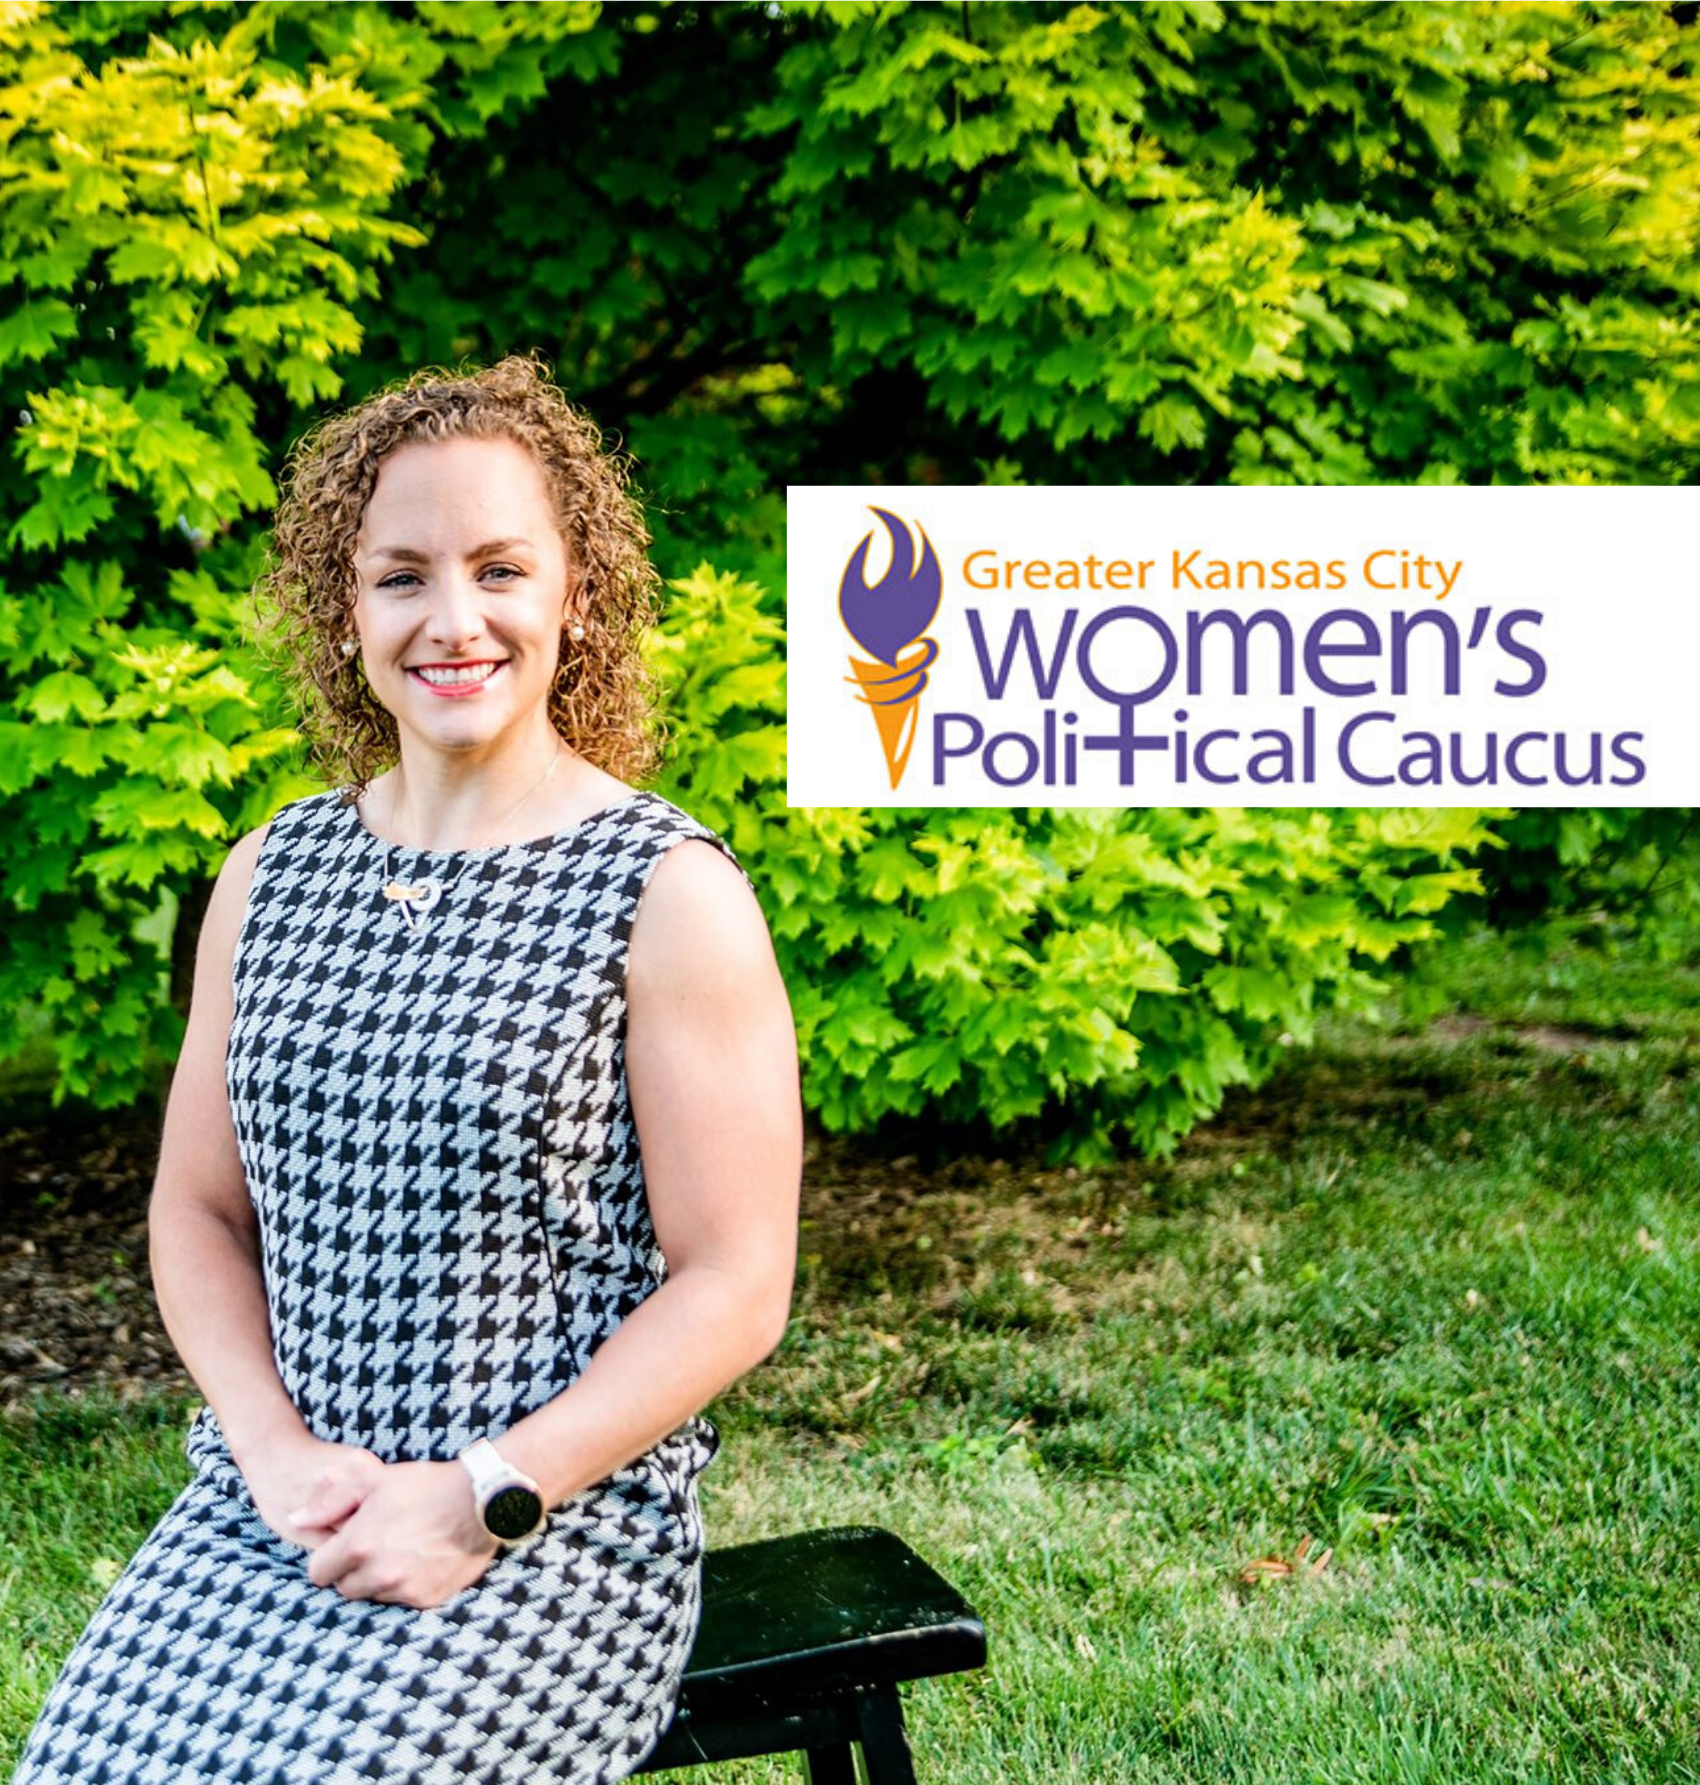 Endorsed By Greater Kansas City Women's Political Caucus